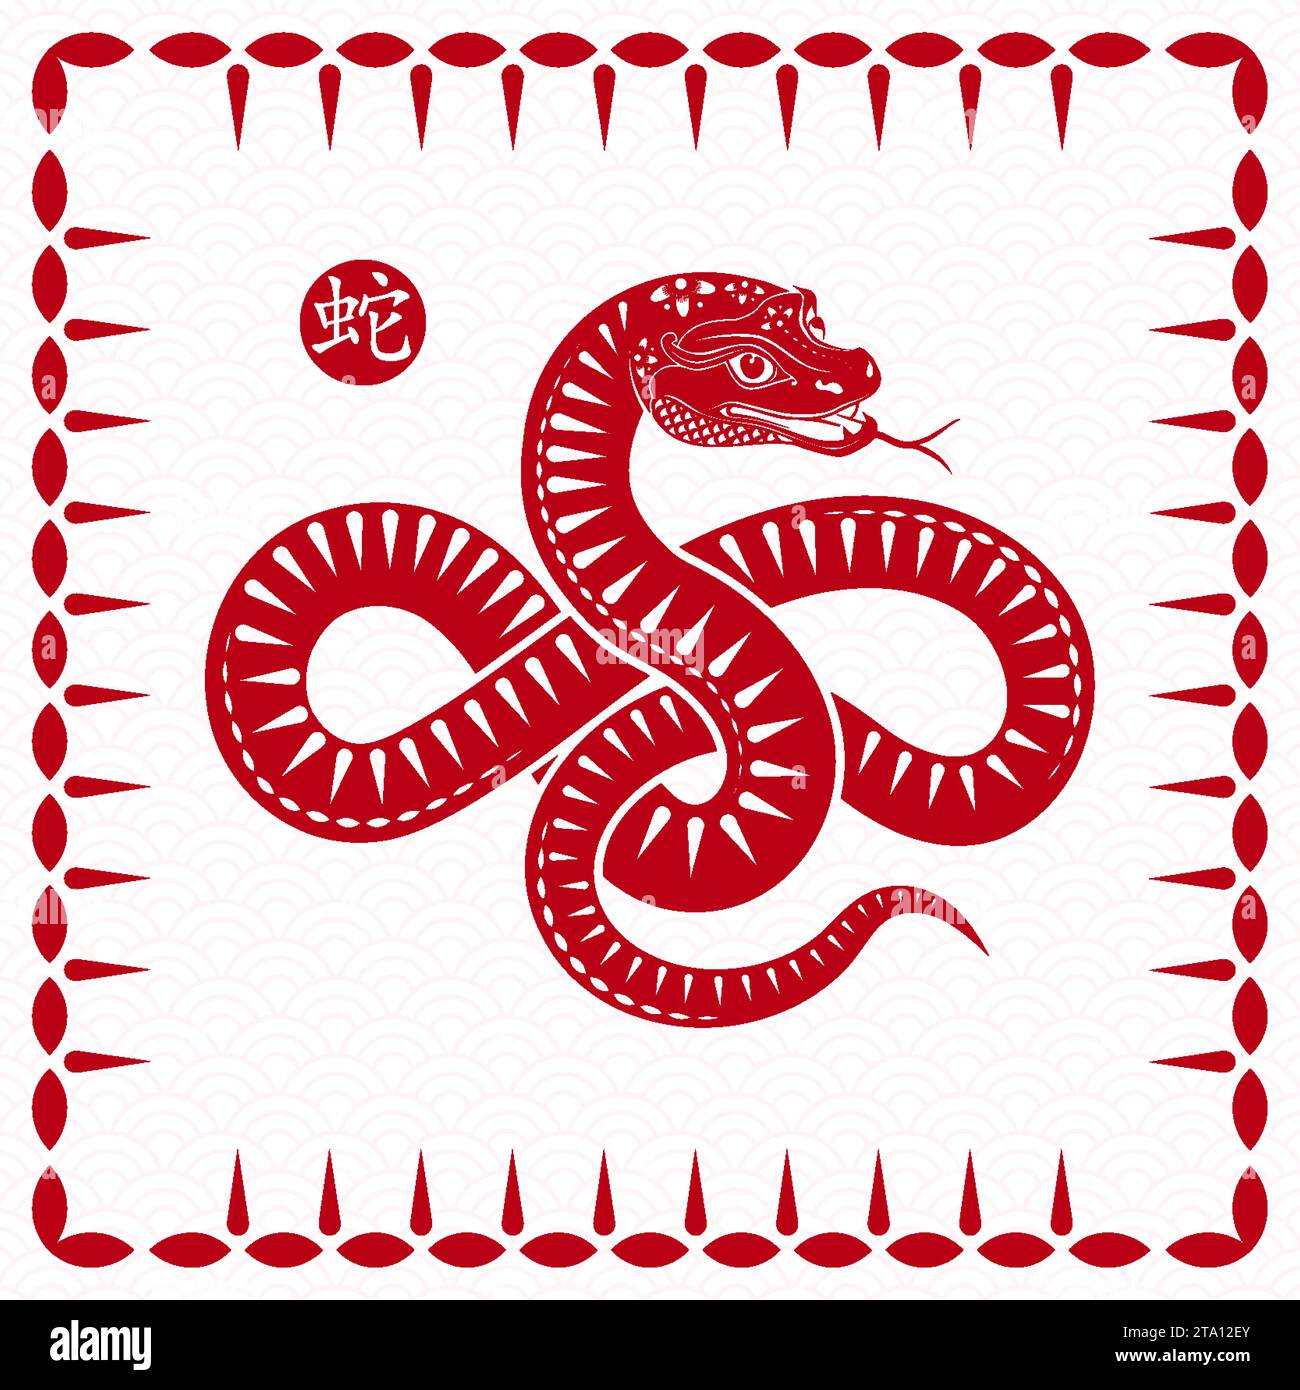 Play the Google Snake Logo made for Chinese New Year